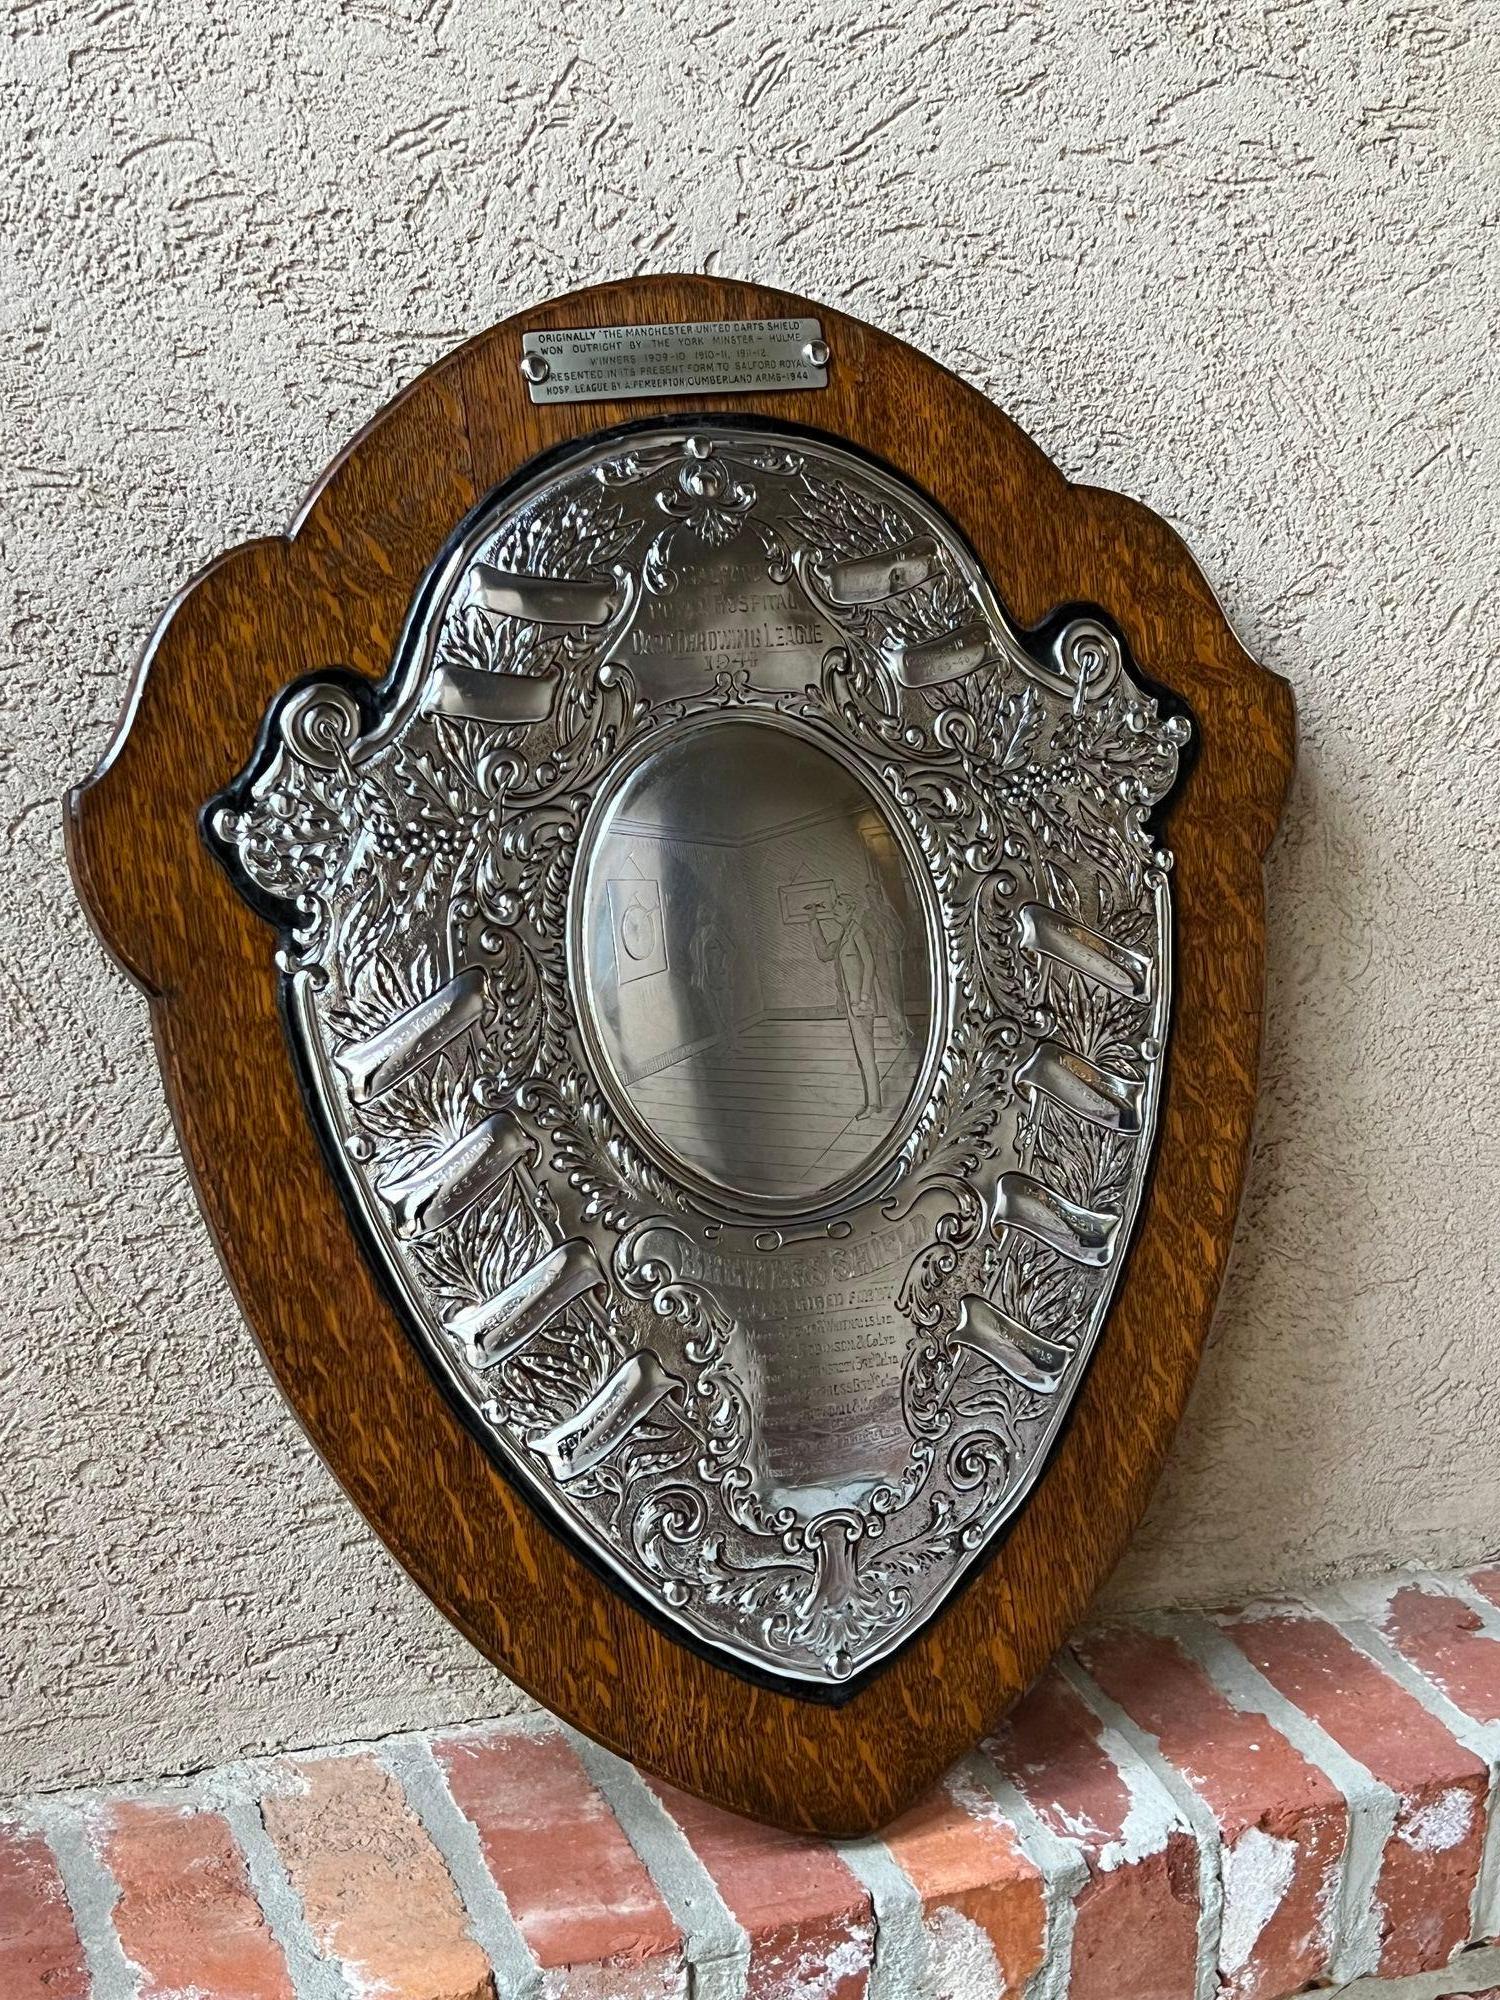 Antique English Dart Game Trophy Award Shield Oak Plaque Silver Plate c1909.
Direct from England, just arrived in our most recent container, we have several of these one-of-a-kind English trophies that are brimming with provenance, and oh “the